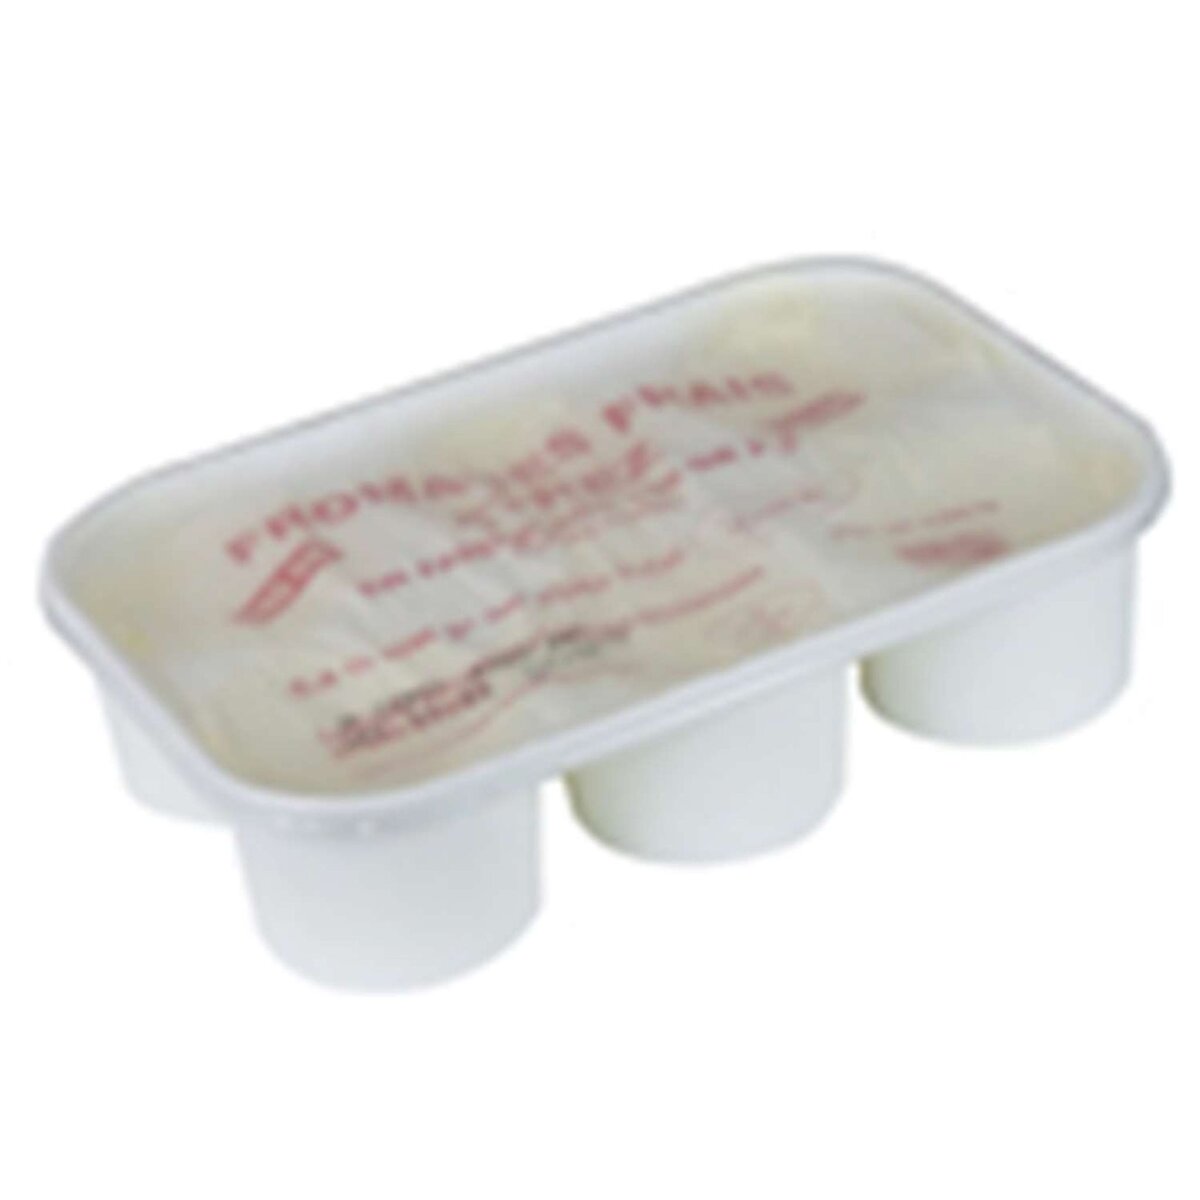 Fromage blc 6x150g 7%